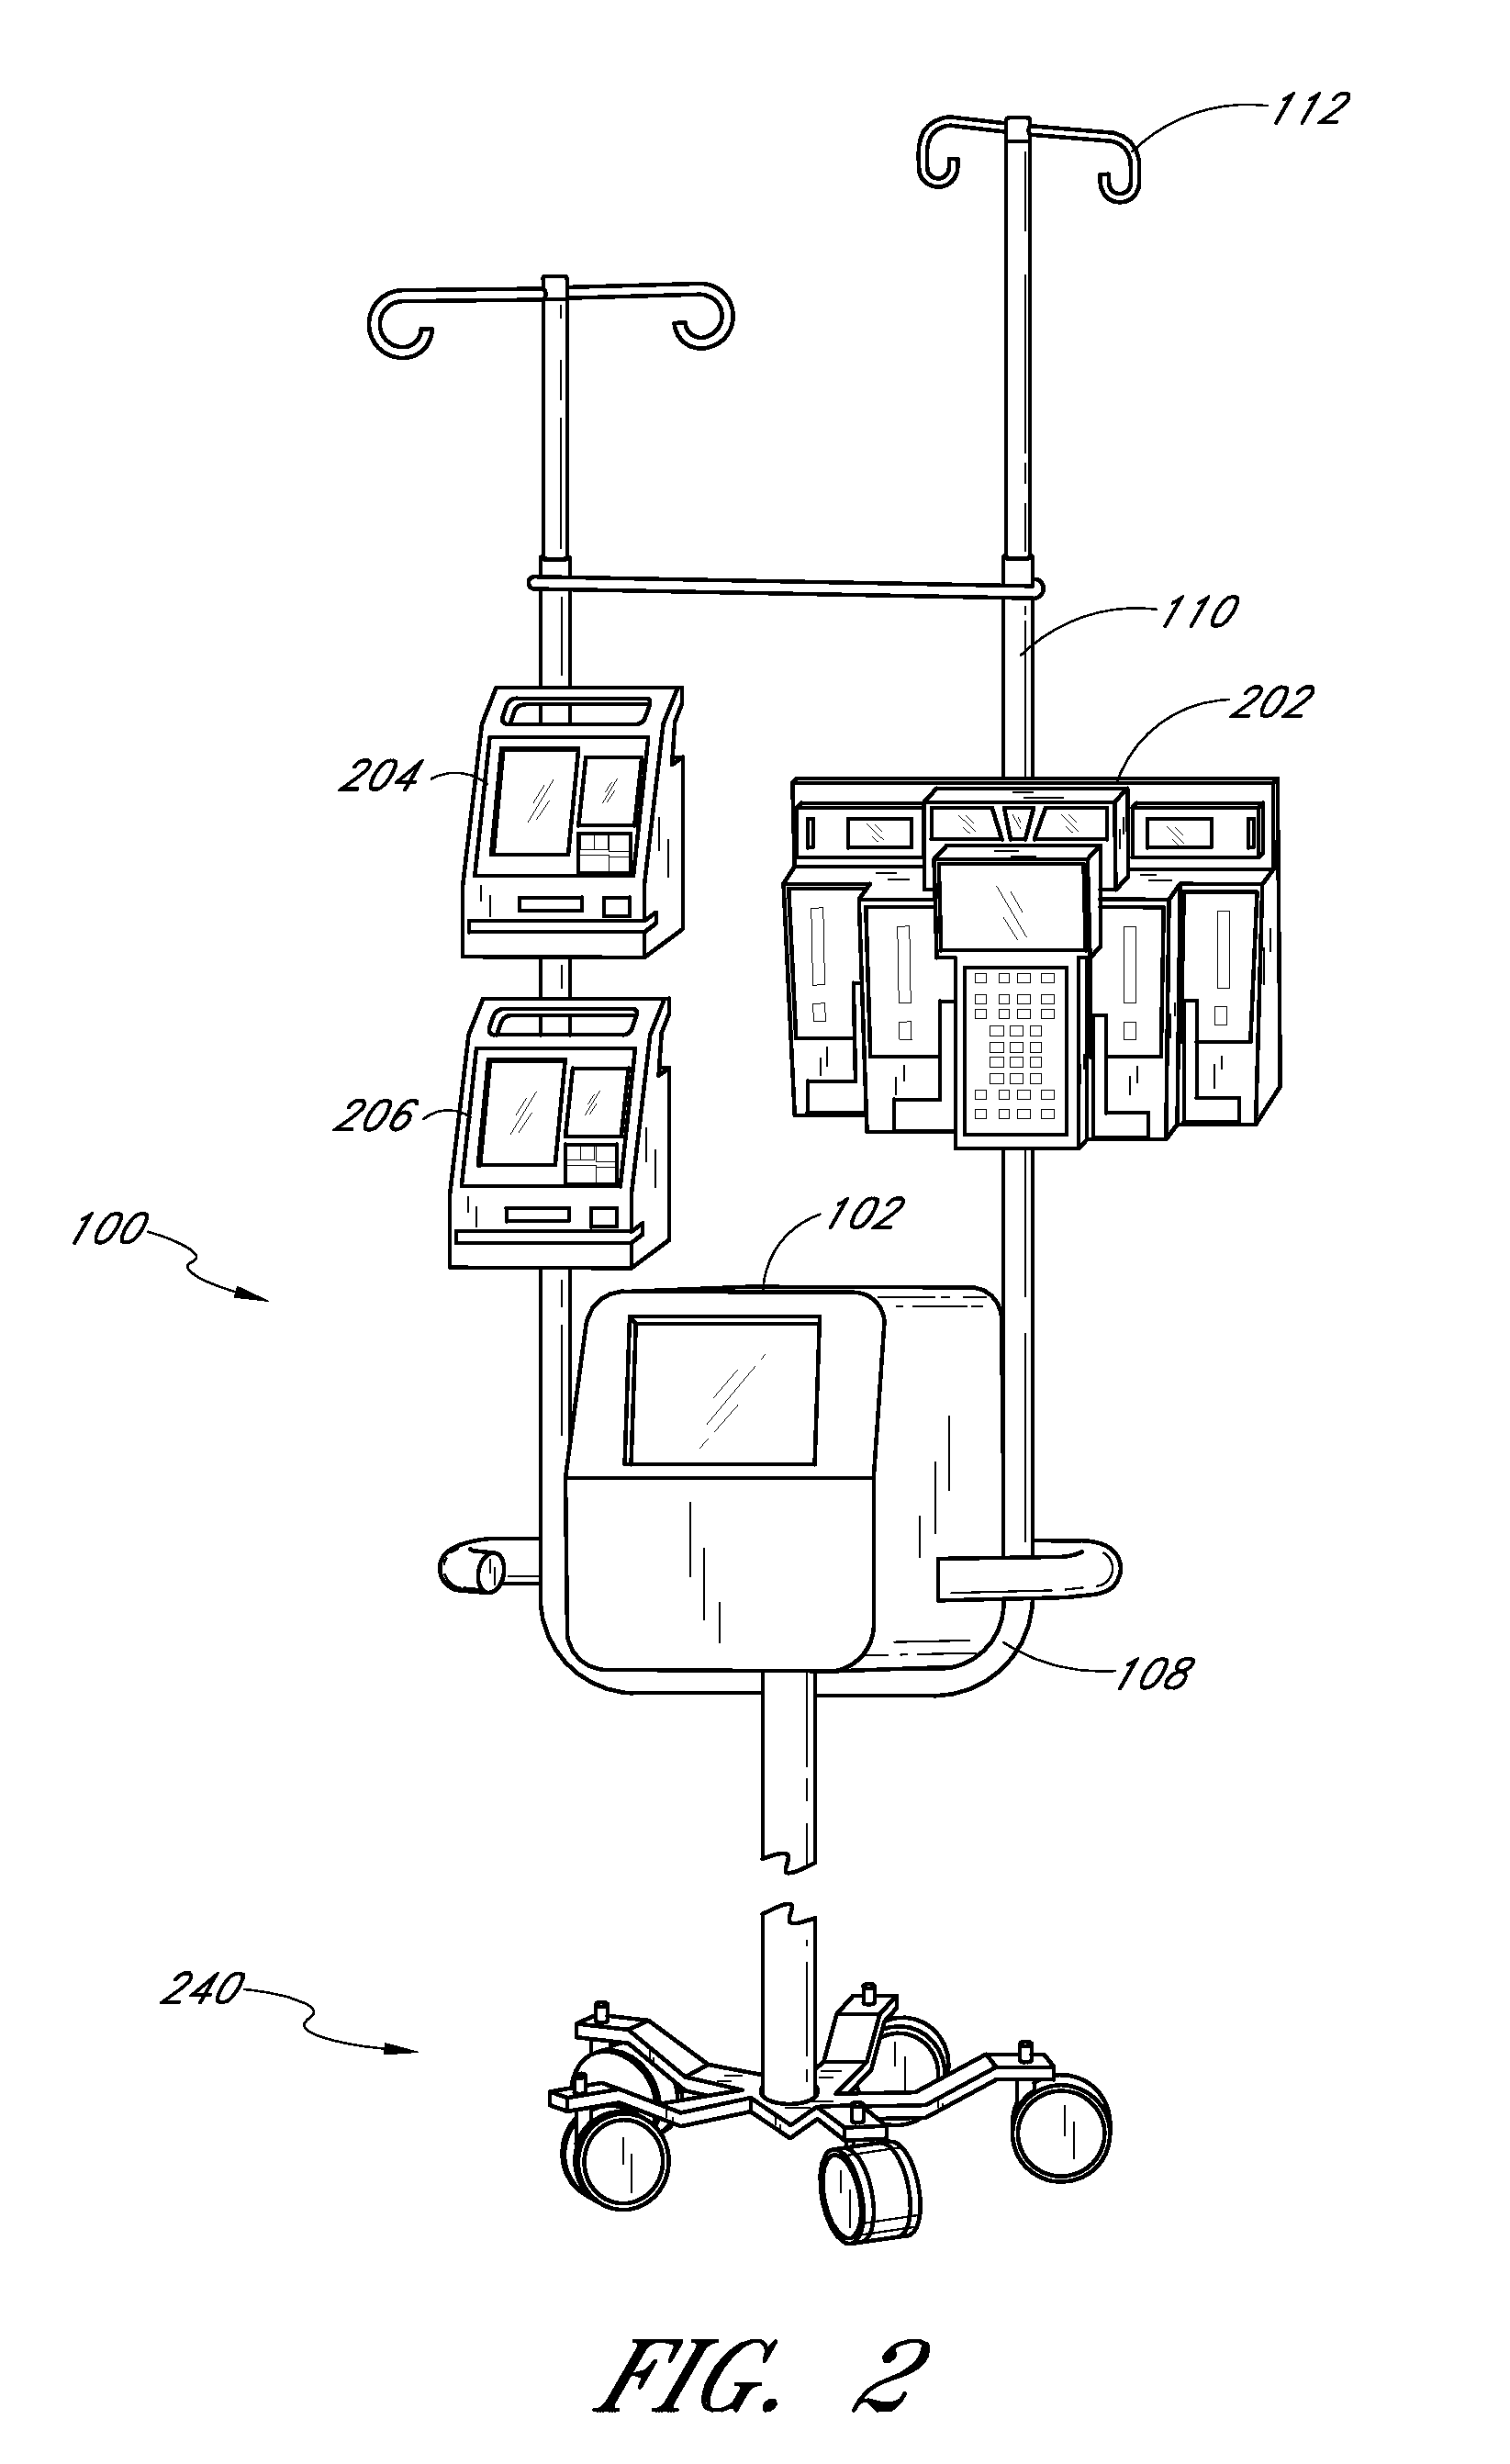 Fluid injection and safety system